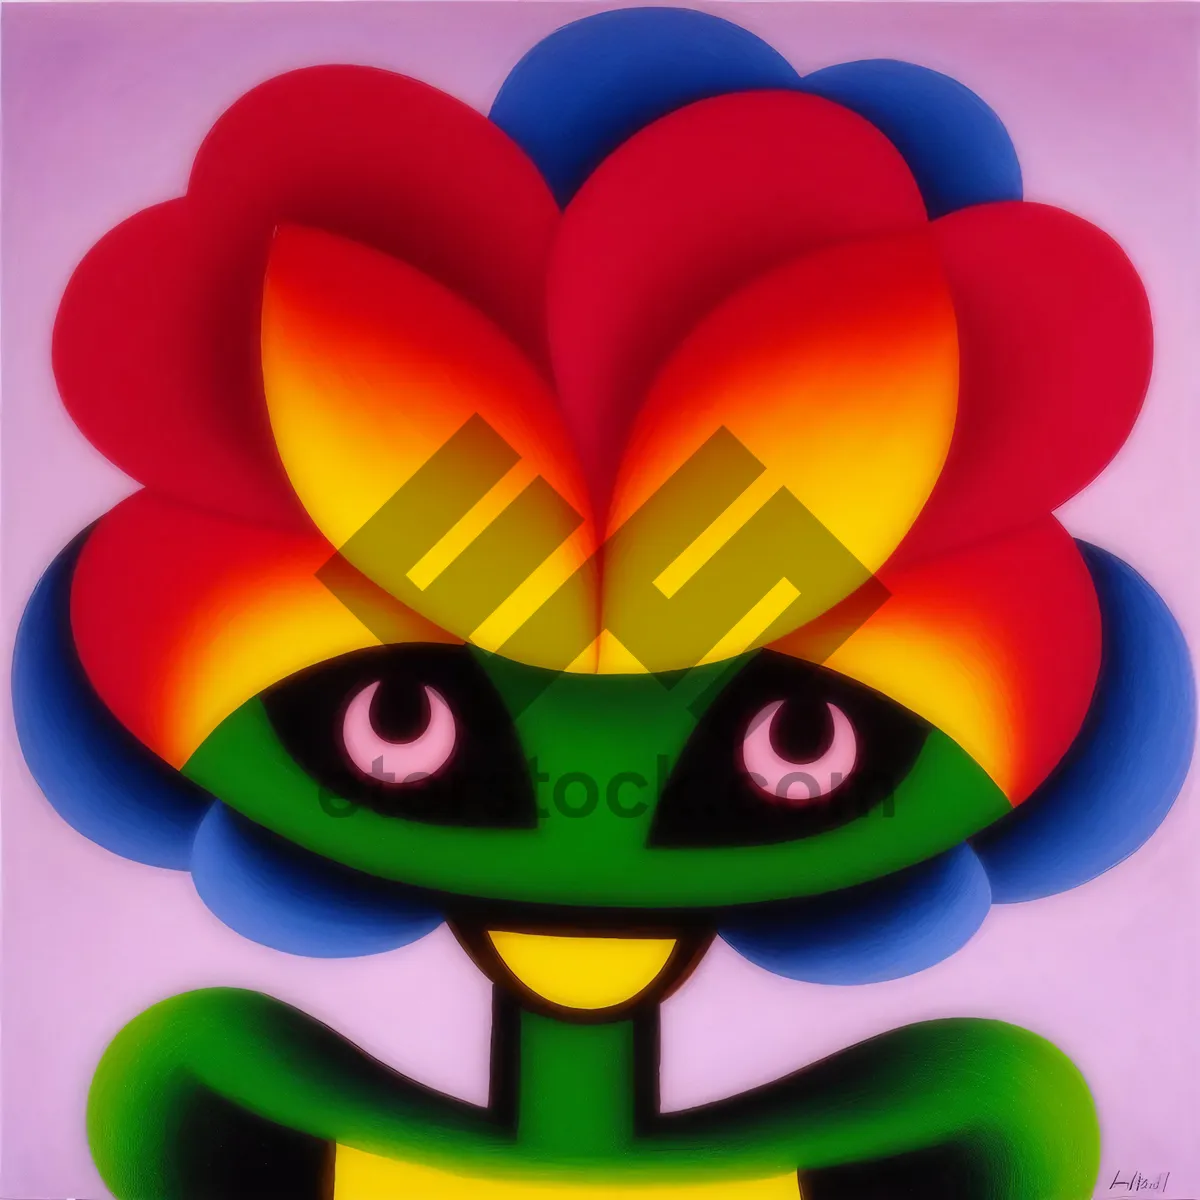 Picture of Colorful Clover Cartoon Symbol